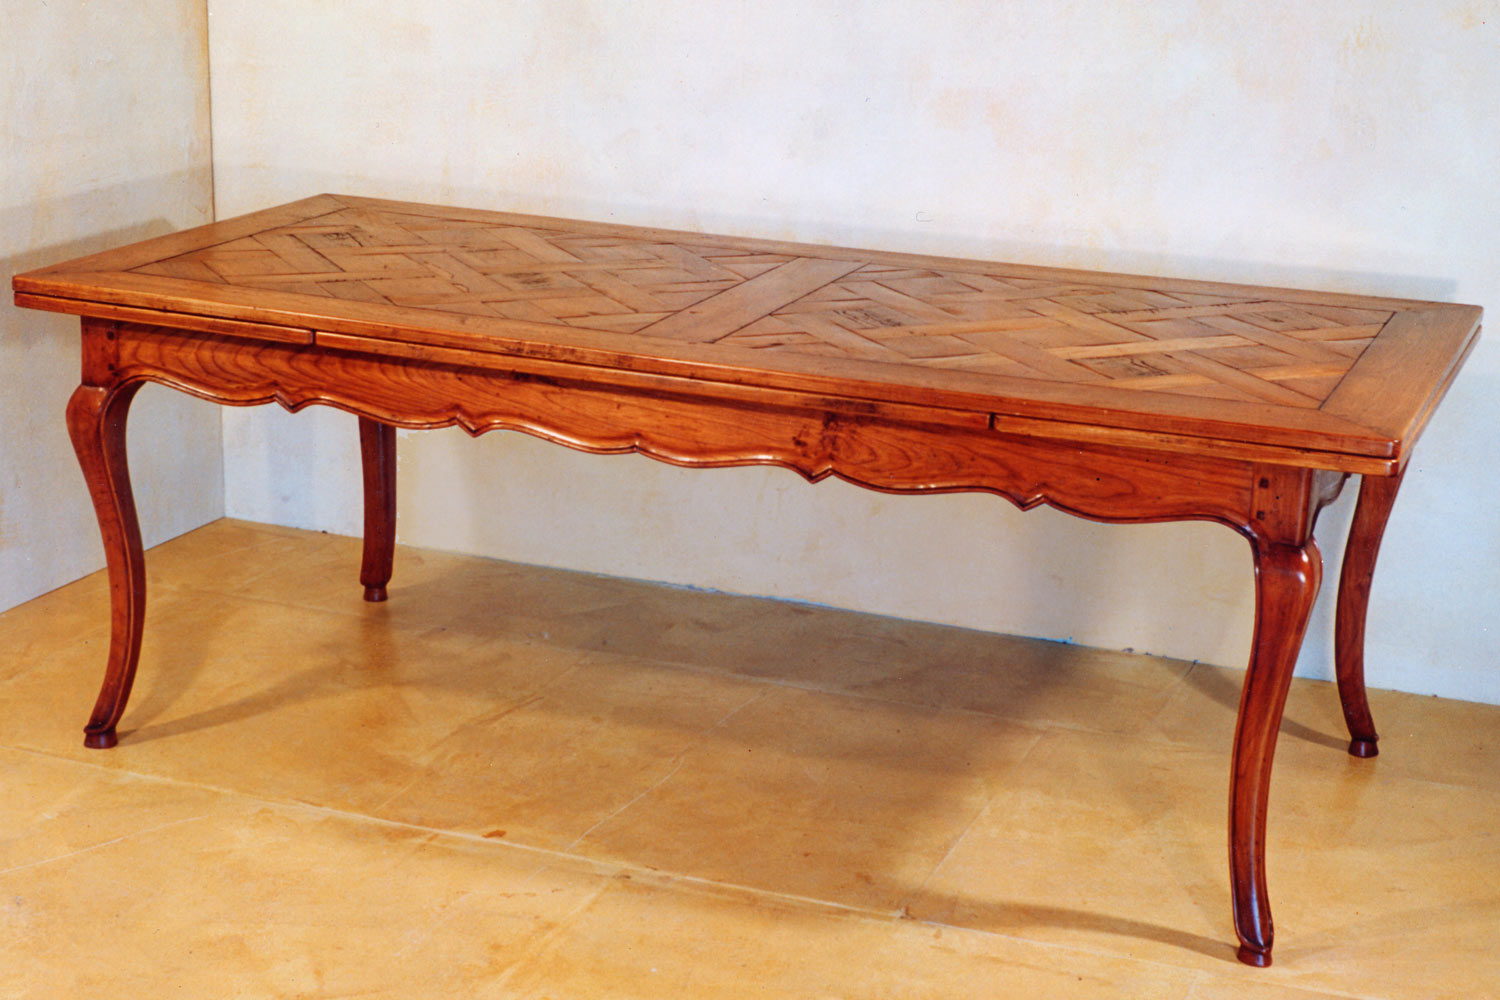 10 French Provincial cherry-wood furniture by Jean-Christophe Burckhardt